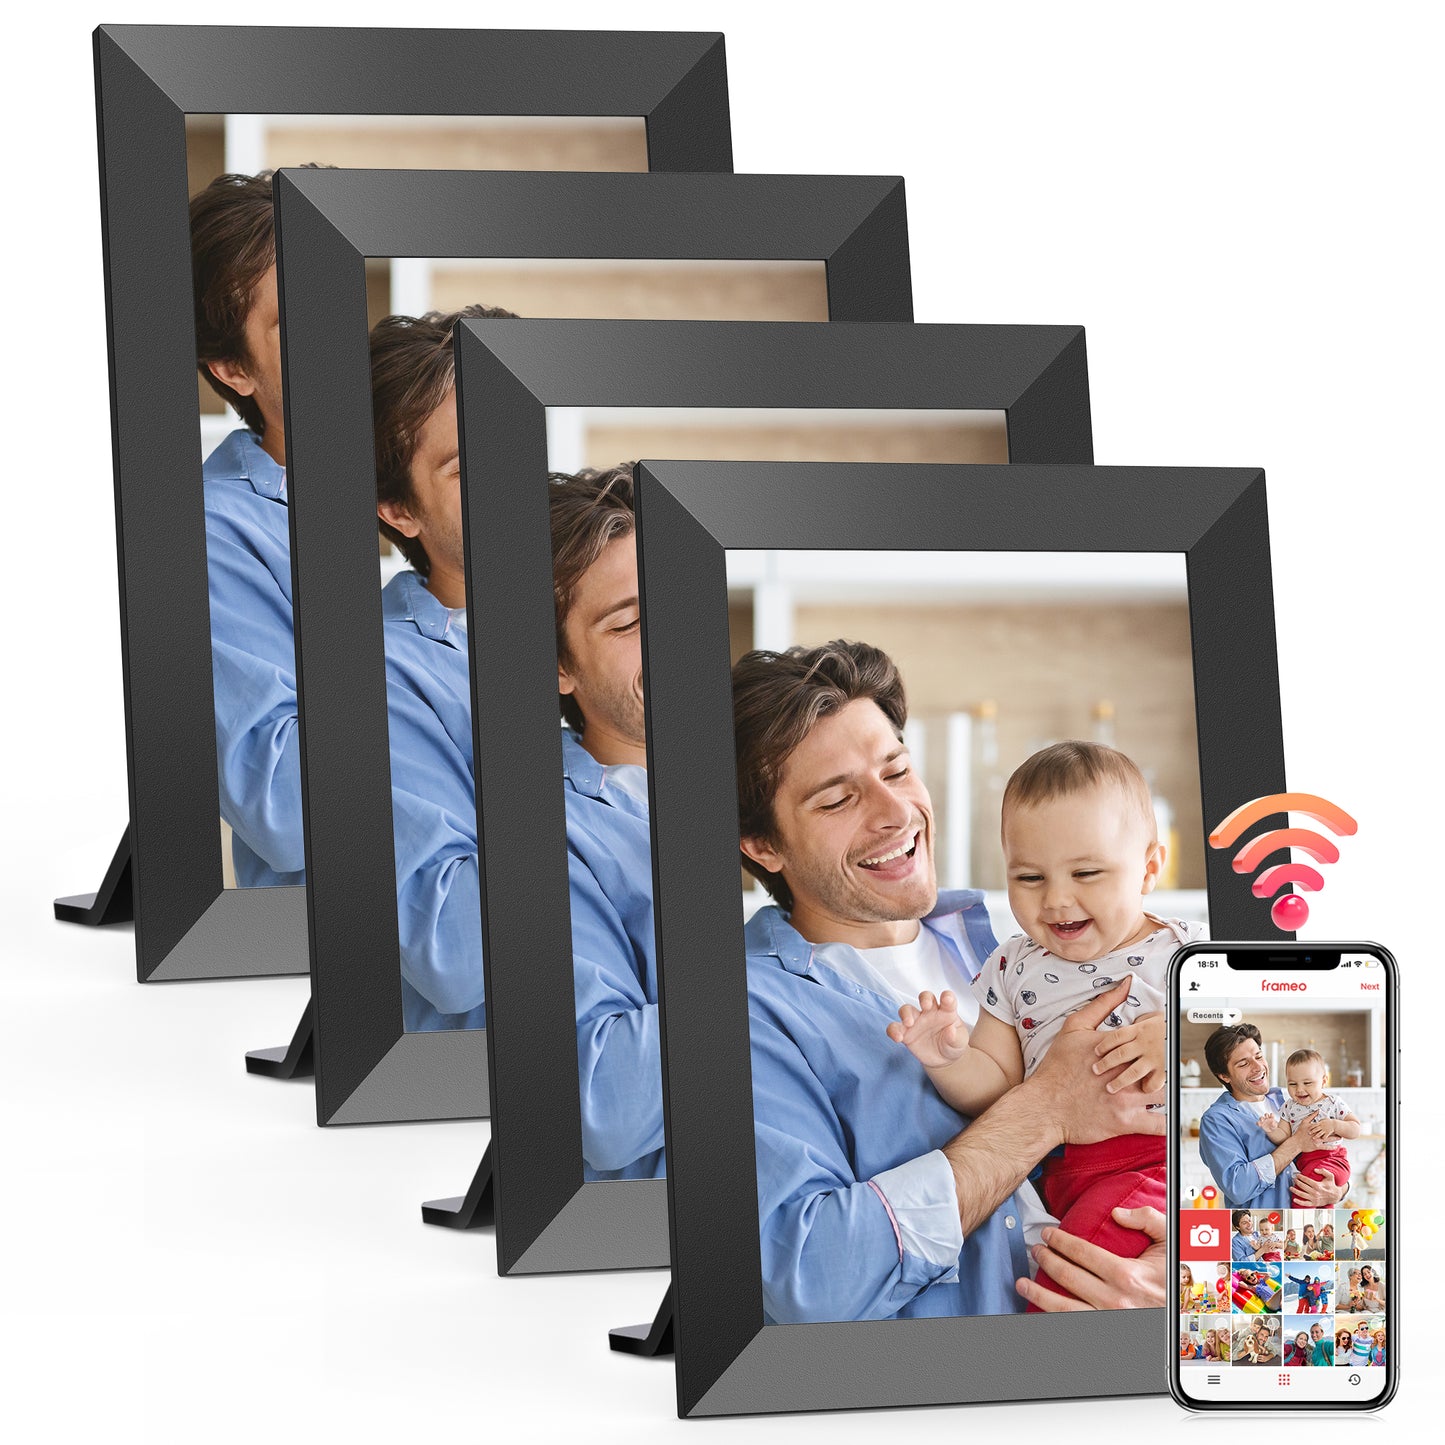 RICILAR Frameo WiFi Digital Picture Frames 4 Pack, 10.1-inch Electronic Photo Frames with IPS Touch Screen, 32GB Storage, Auto-Rotate, Wall Mountable, Amazing Gift for Family and Friends!